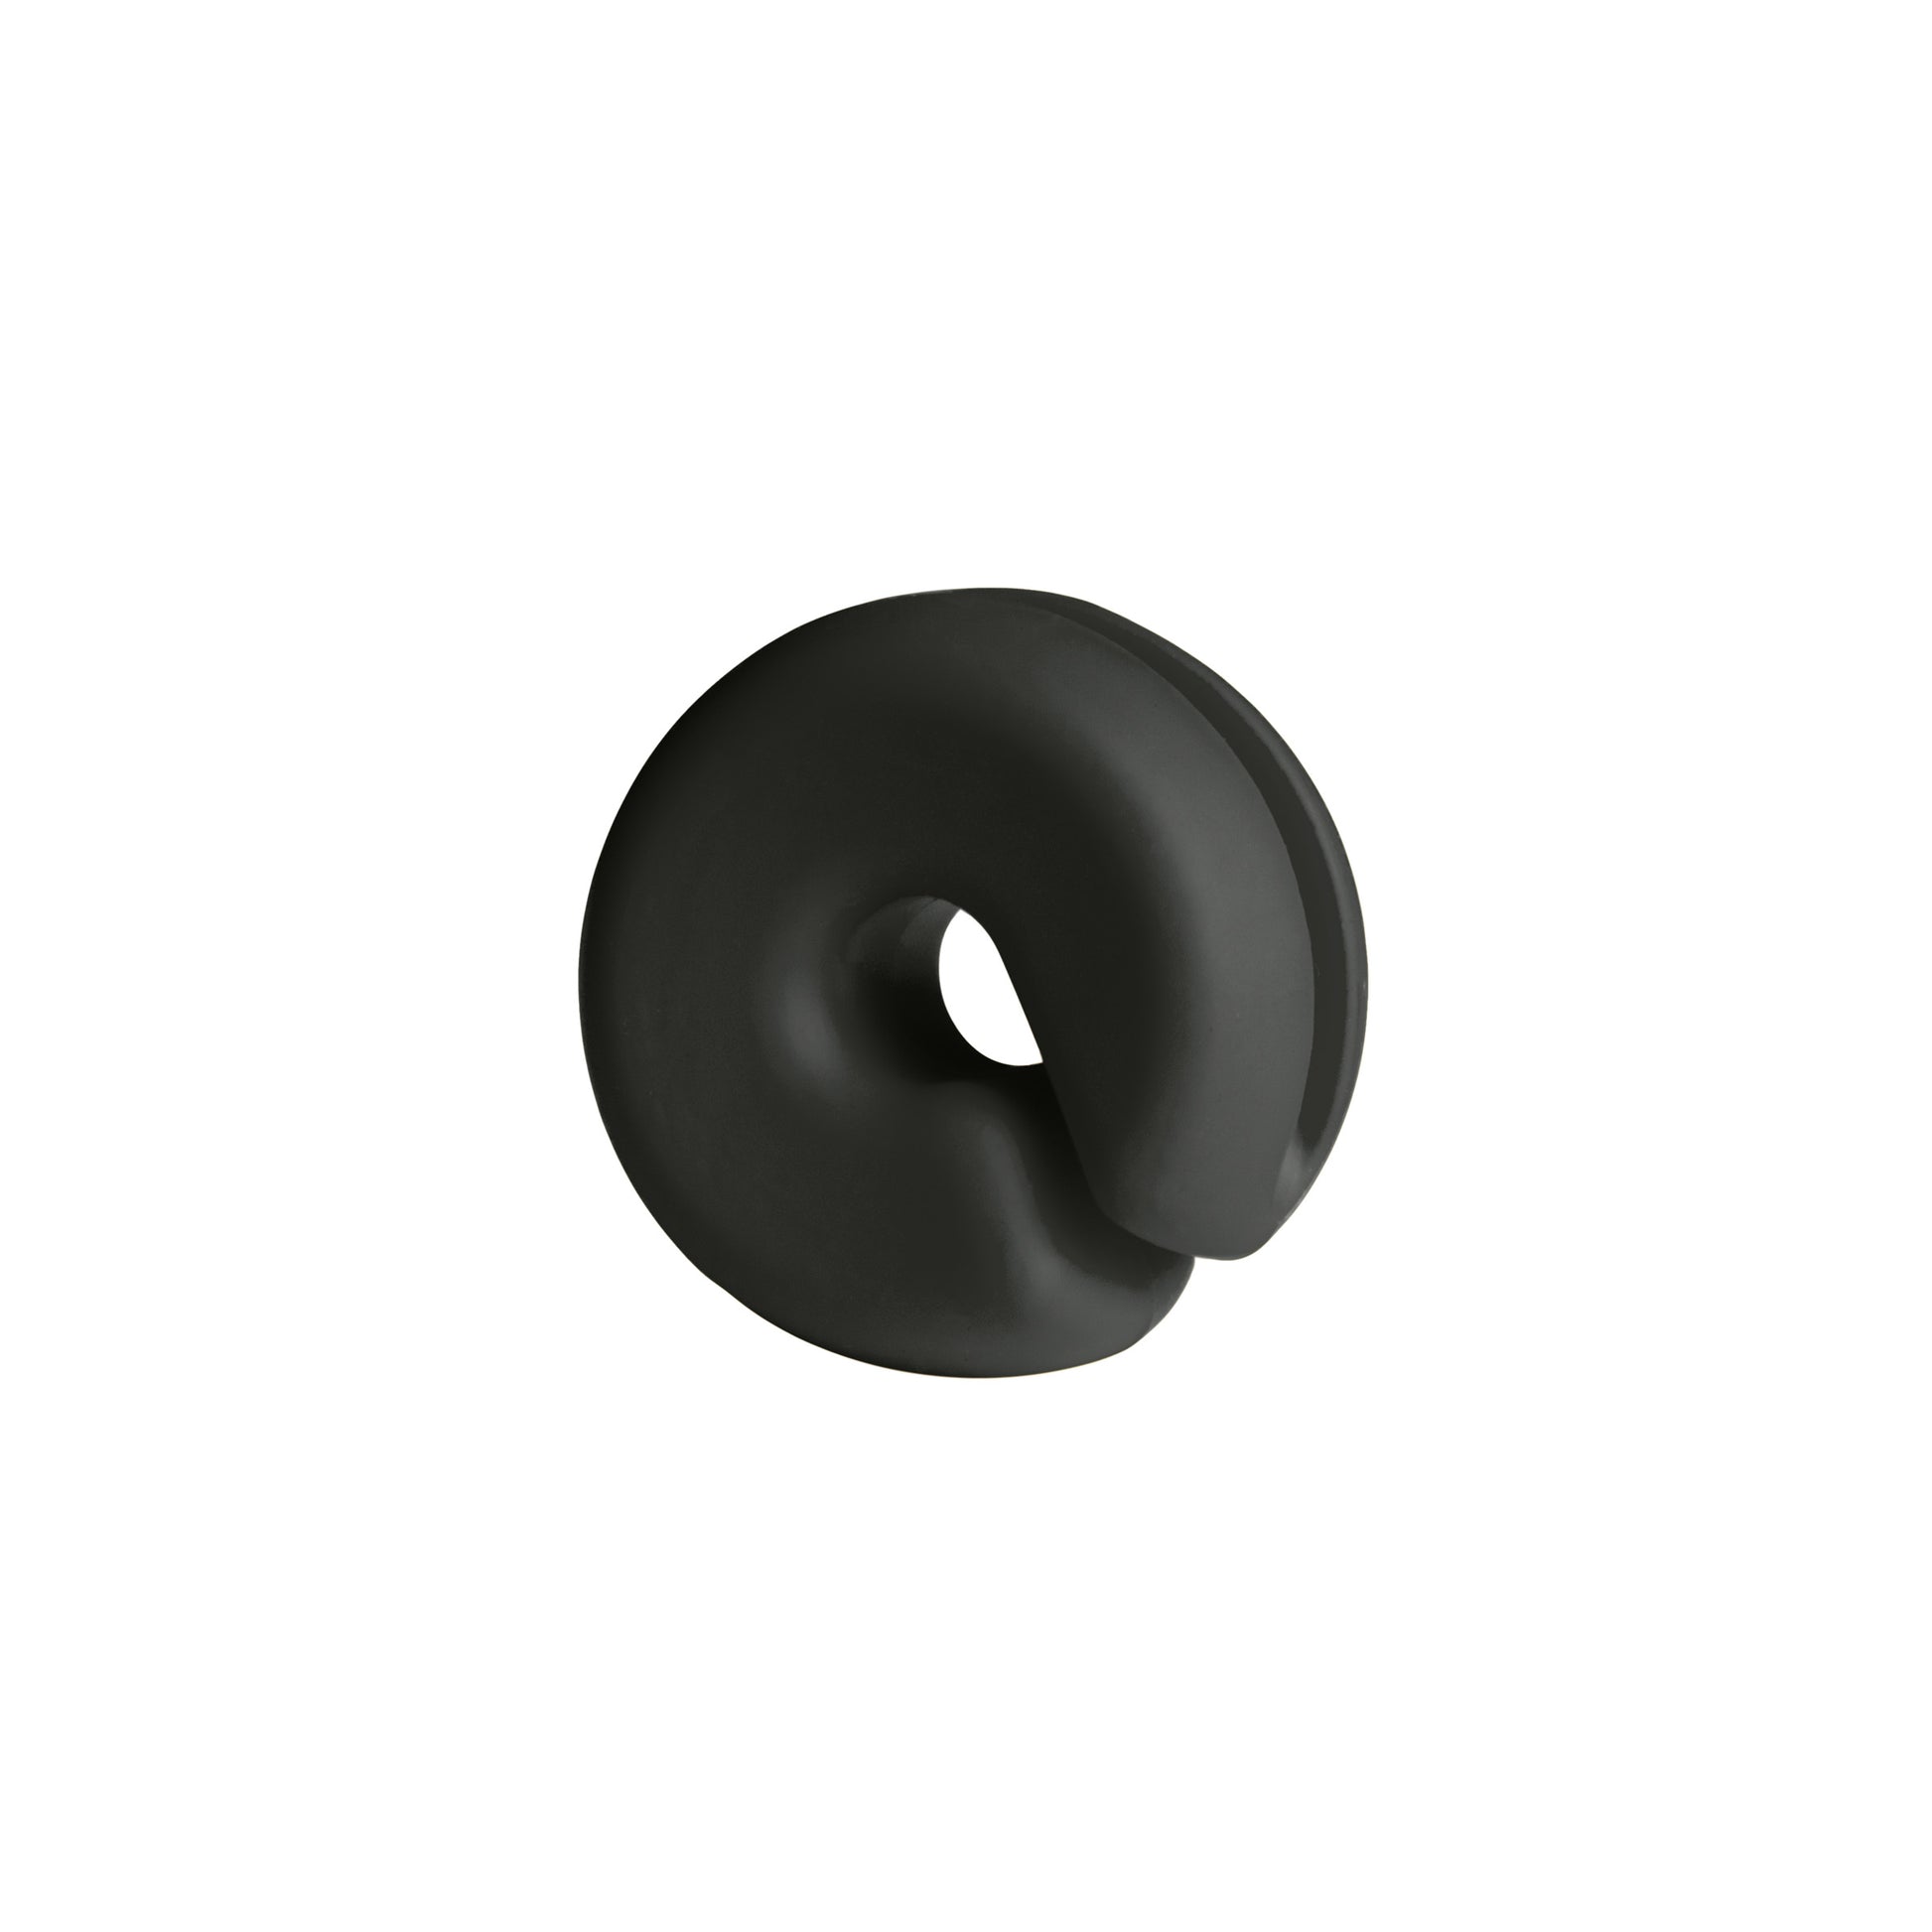 Beautiful matte black silicone pot clip, suitable for holding a CPT